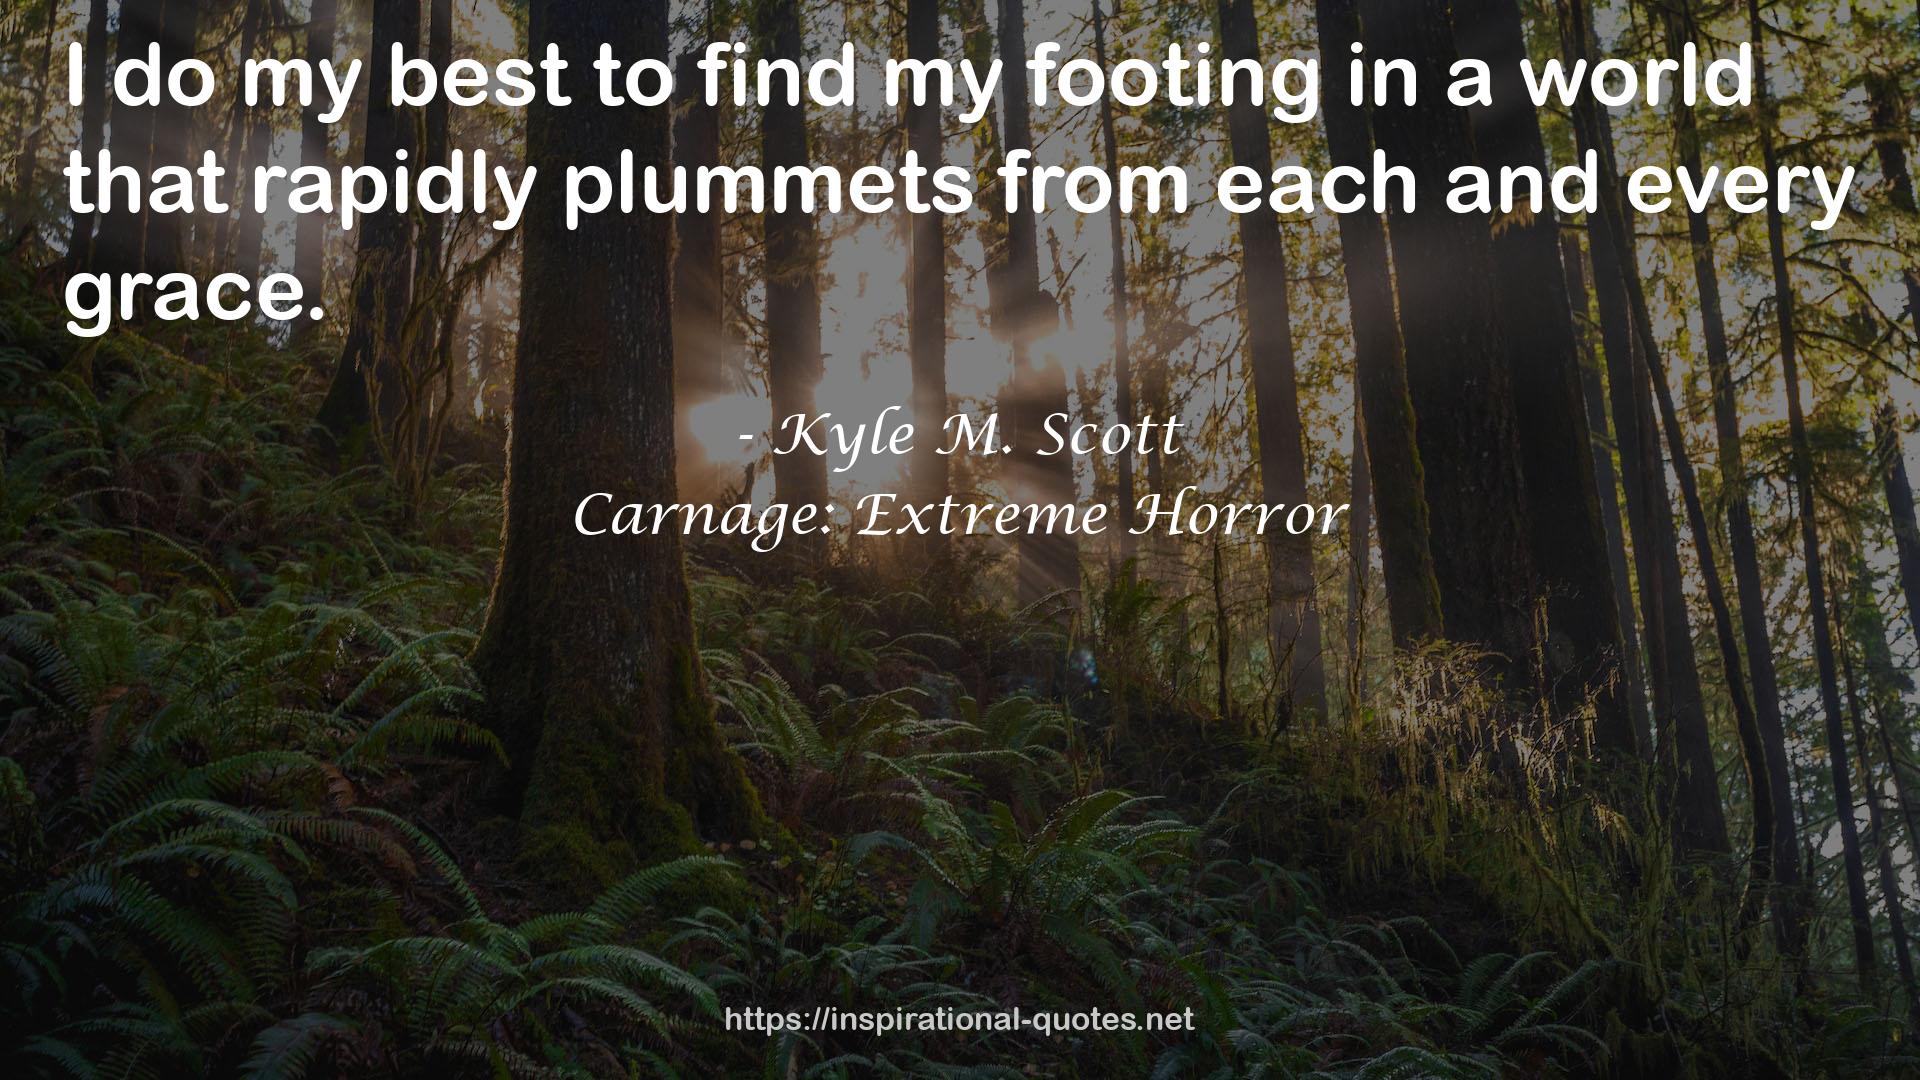 Carnage: Extreme Horror QUOTES